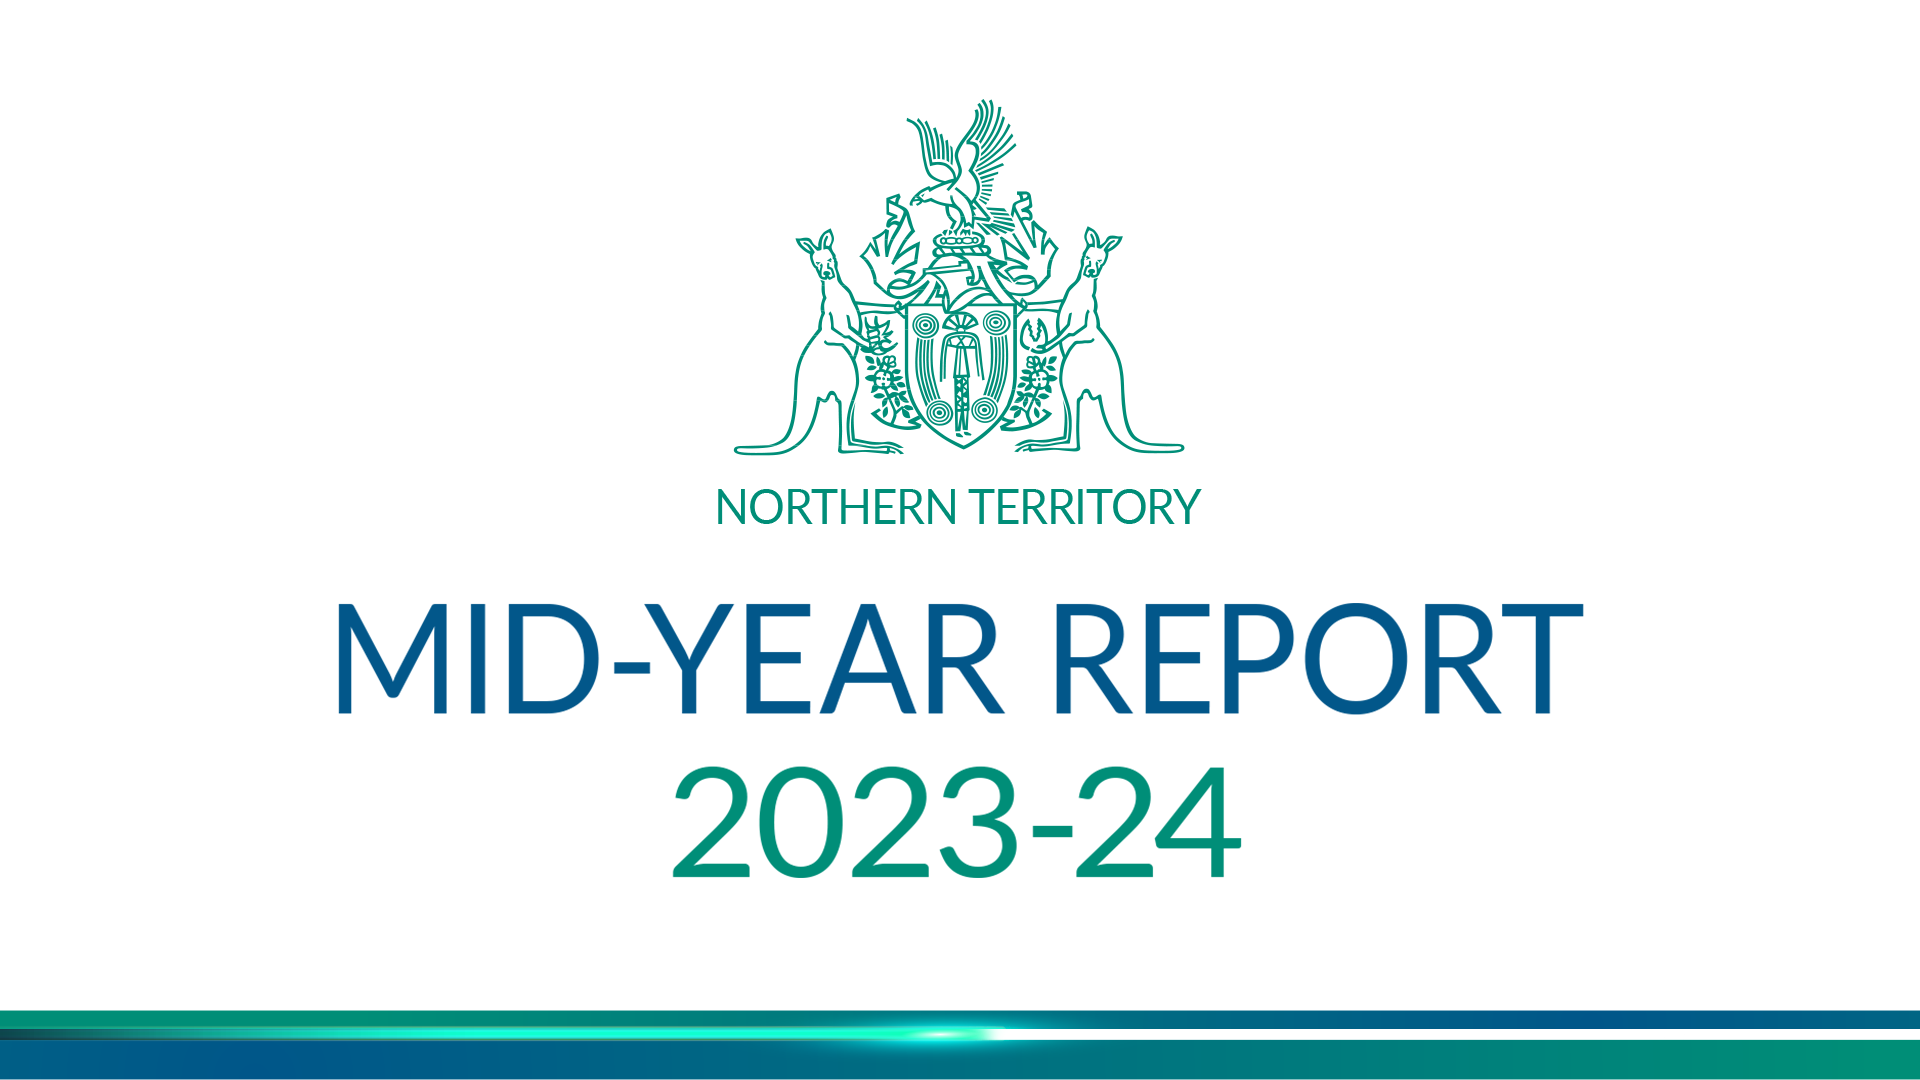 2023-24 Mid-Year Report